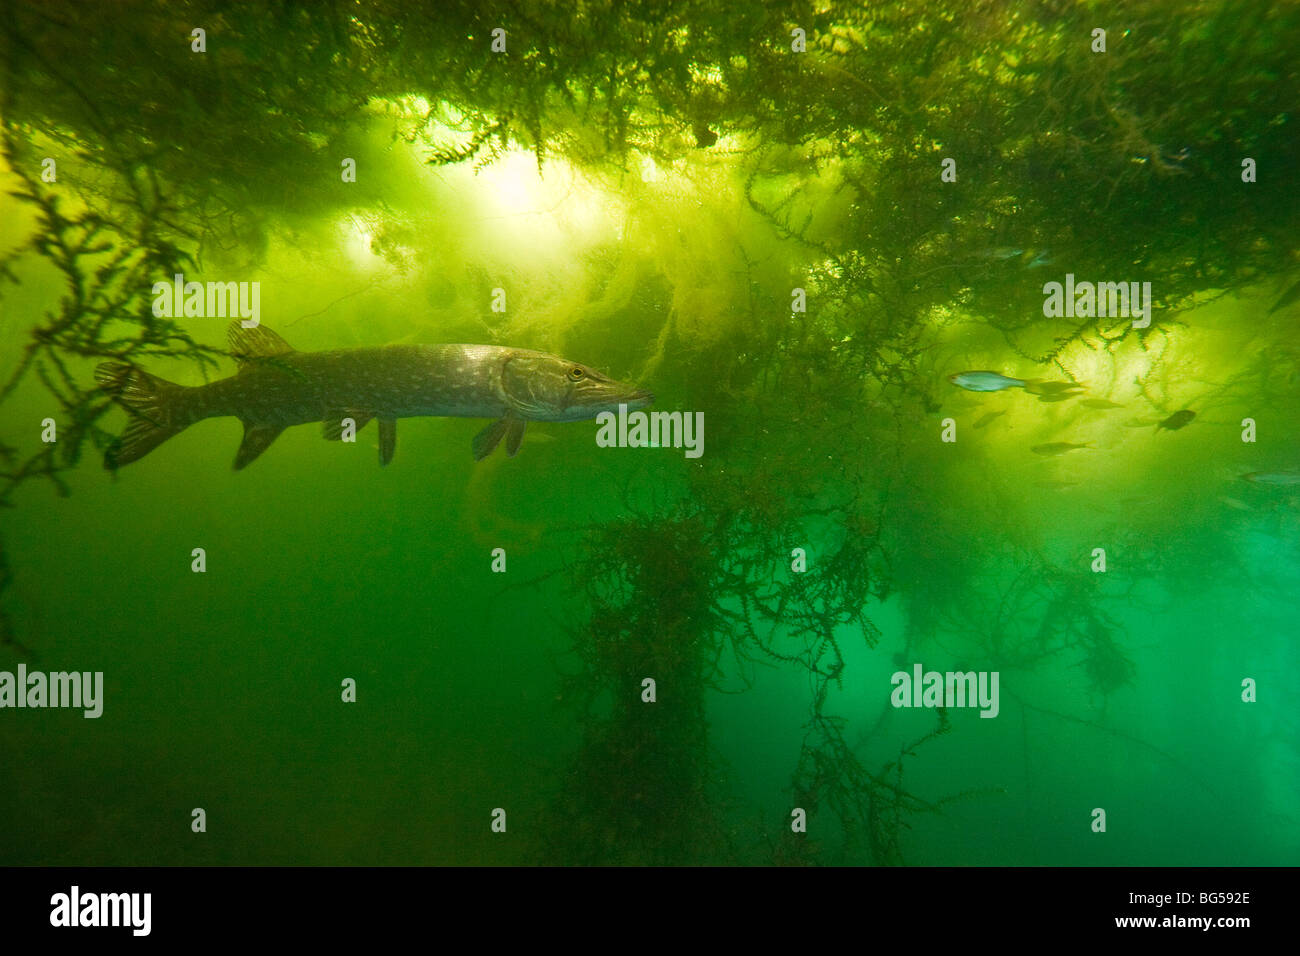 A pike (Esox lucius) in a natural environment. The water surface tends towards a covering of filamentous algae. Stock Photo